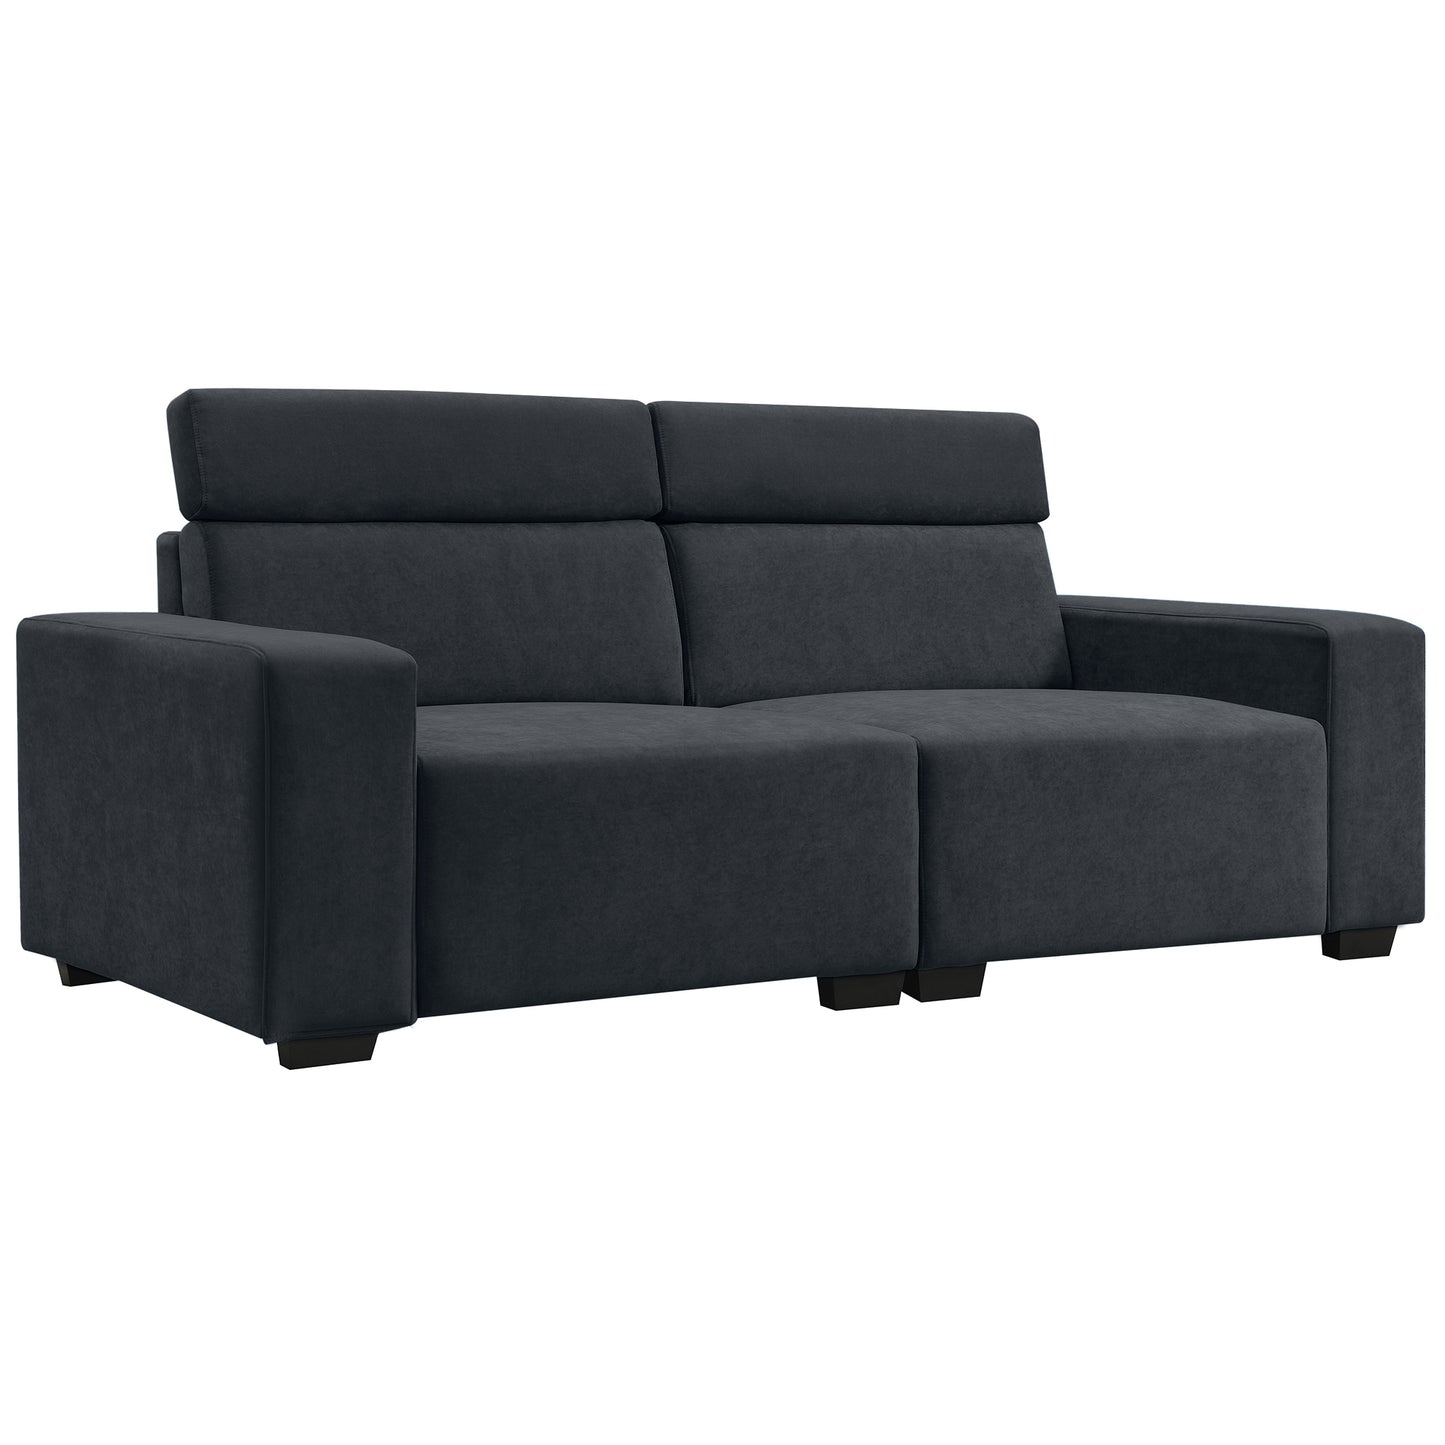 [VIDEO provided] [New] 87*34.2'' 2-3 Seater Sectional Sofa Couch with Multi-Angle Adjustable Headrest,Spacious and Comfortable Velvet Loveseat for Living Room,Studios,Salon,Apartment, Office,3 Colors